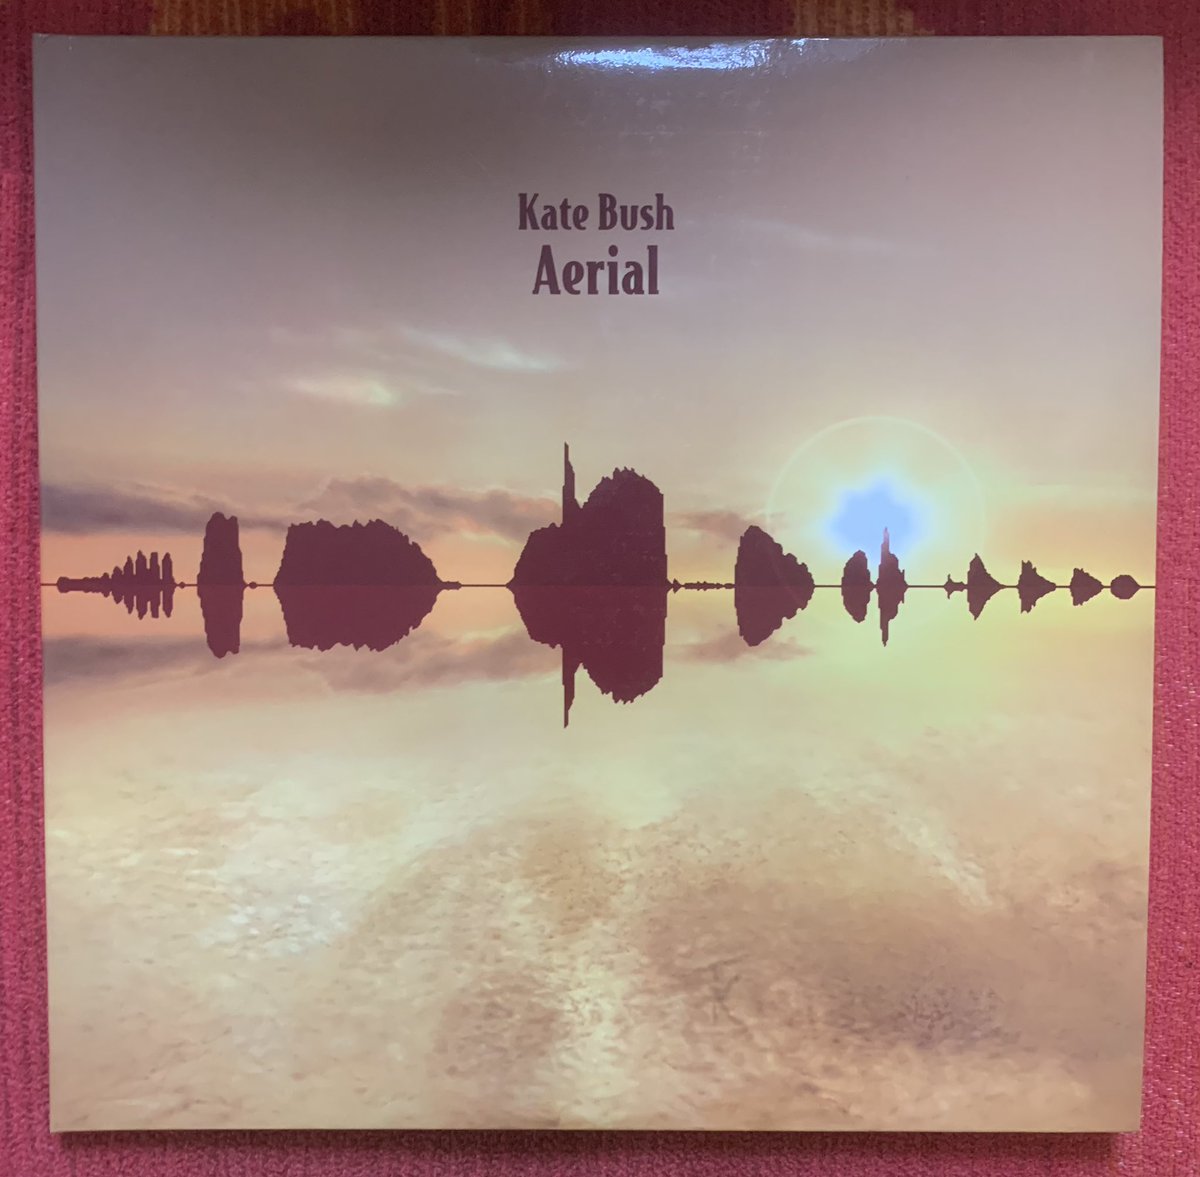 #5albums21cFinal
#NowPIaying 
Kate Bush - Aerial. From 2005